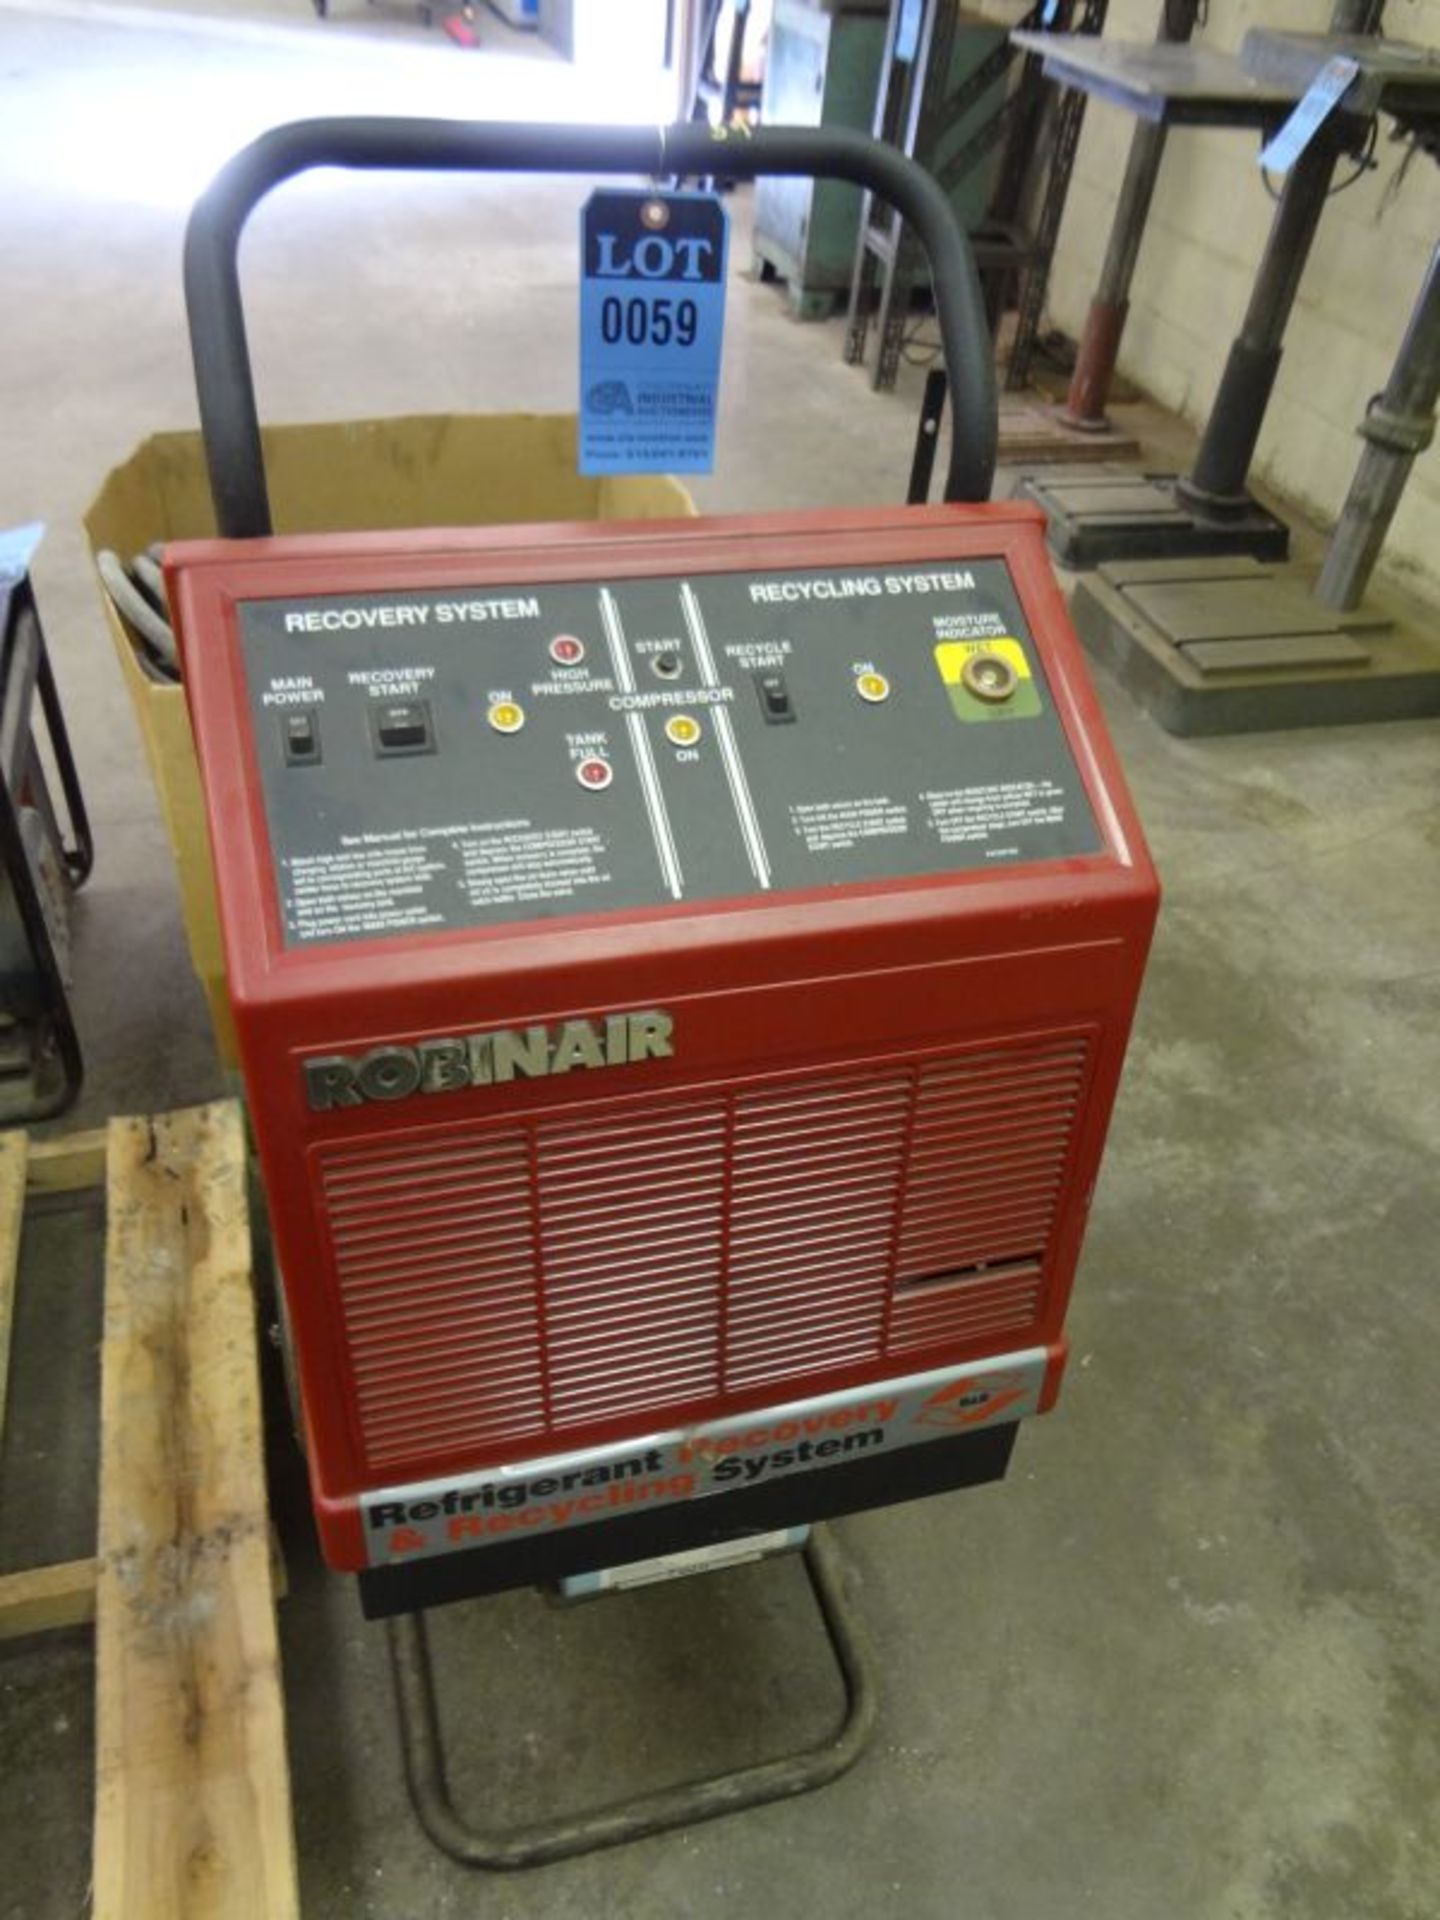 ROBINAIR MODEL 17400A RECOVERY / RECYCLING SYSTEM